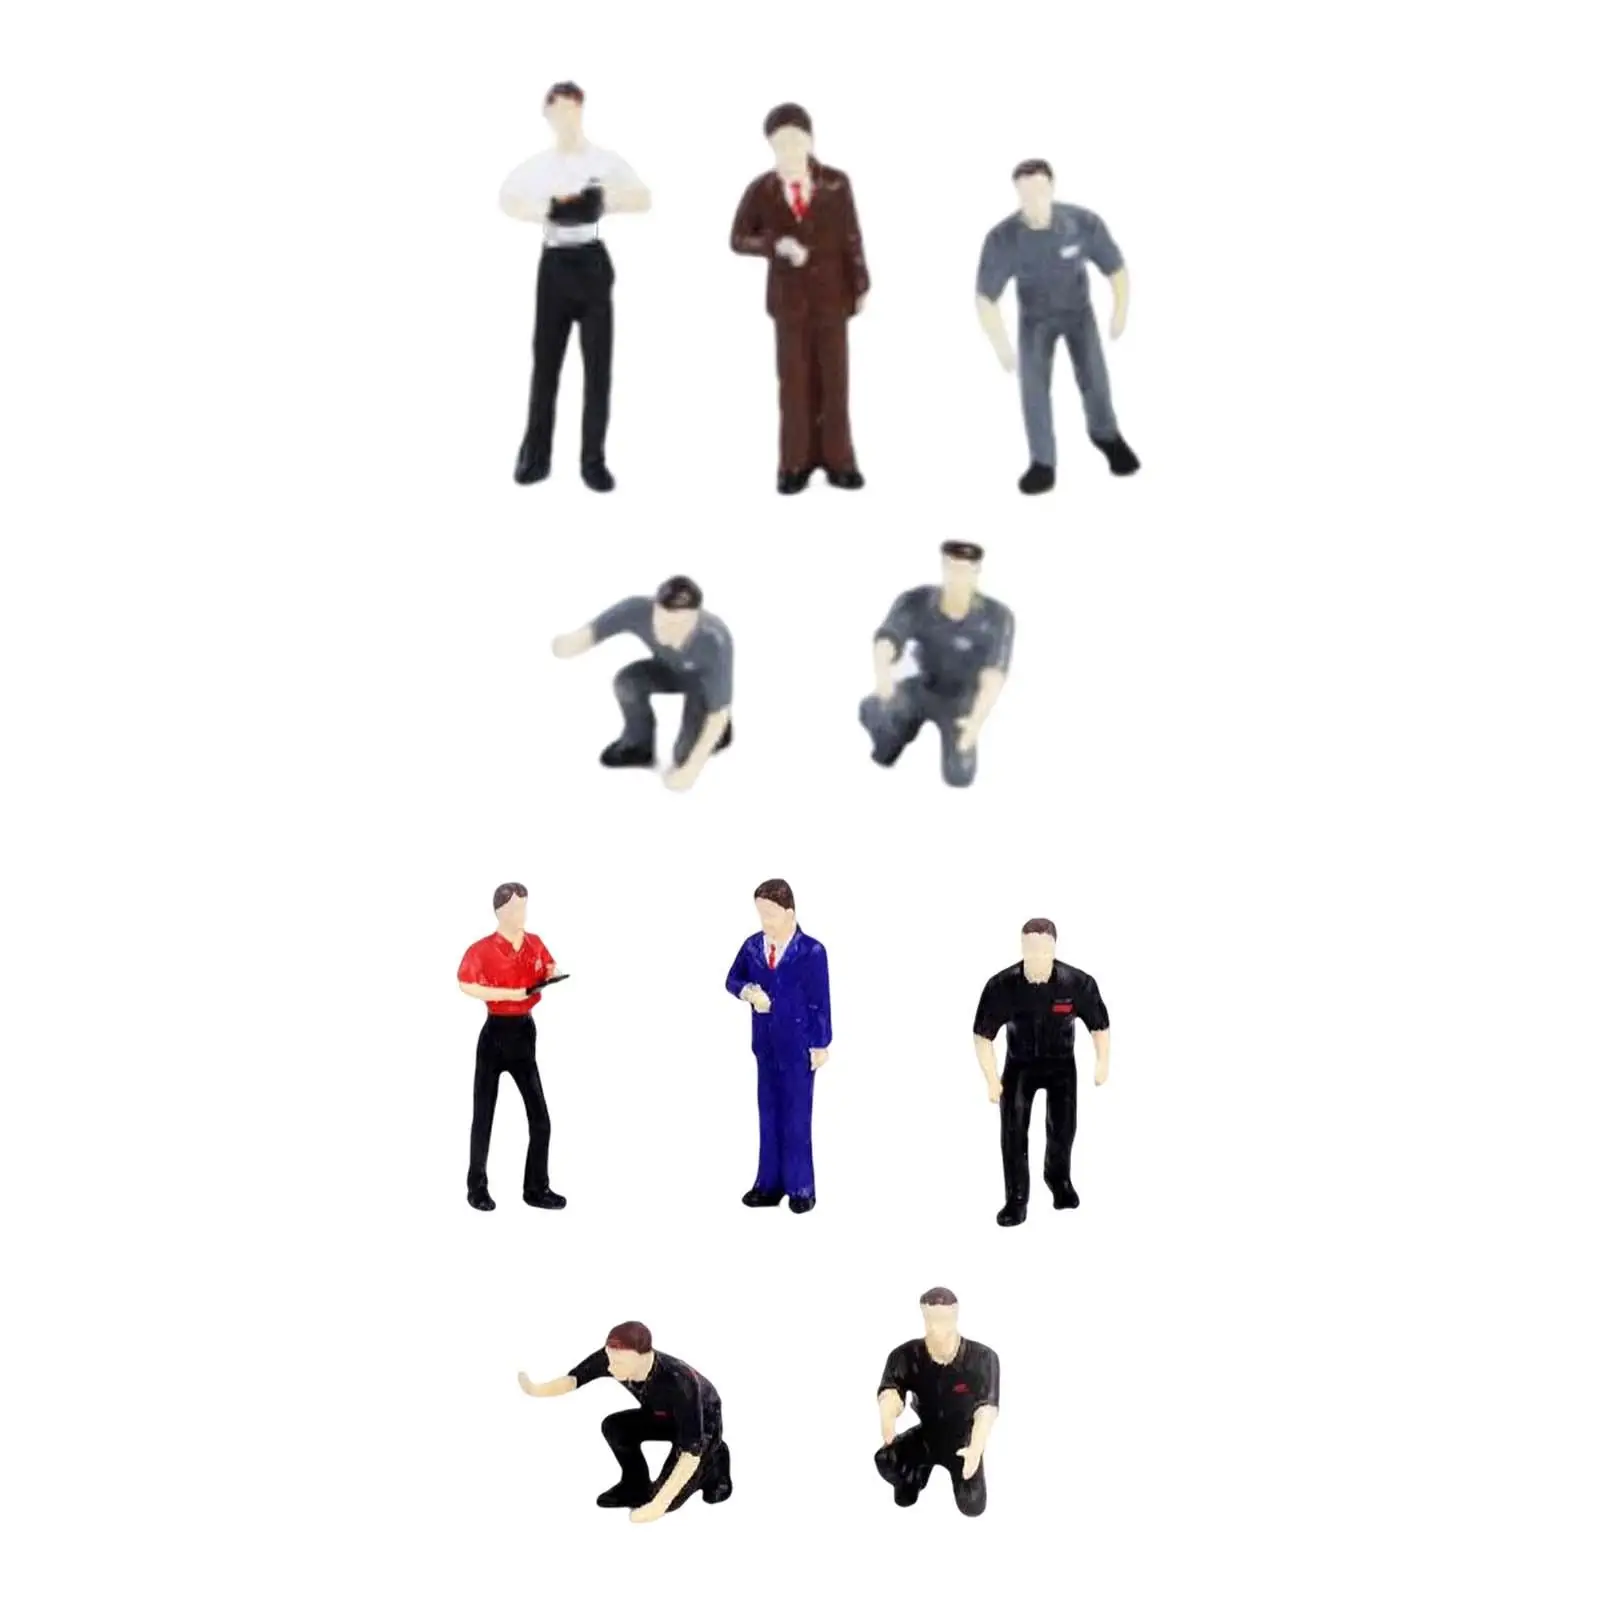 5Pcs Hand Painted 1/64 Repairman Figures People Model Layout Miniature Scenes Diorama Scenery Movie Props S Scale Ornaments